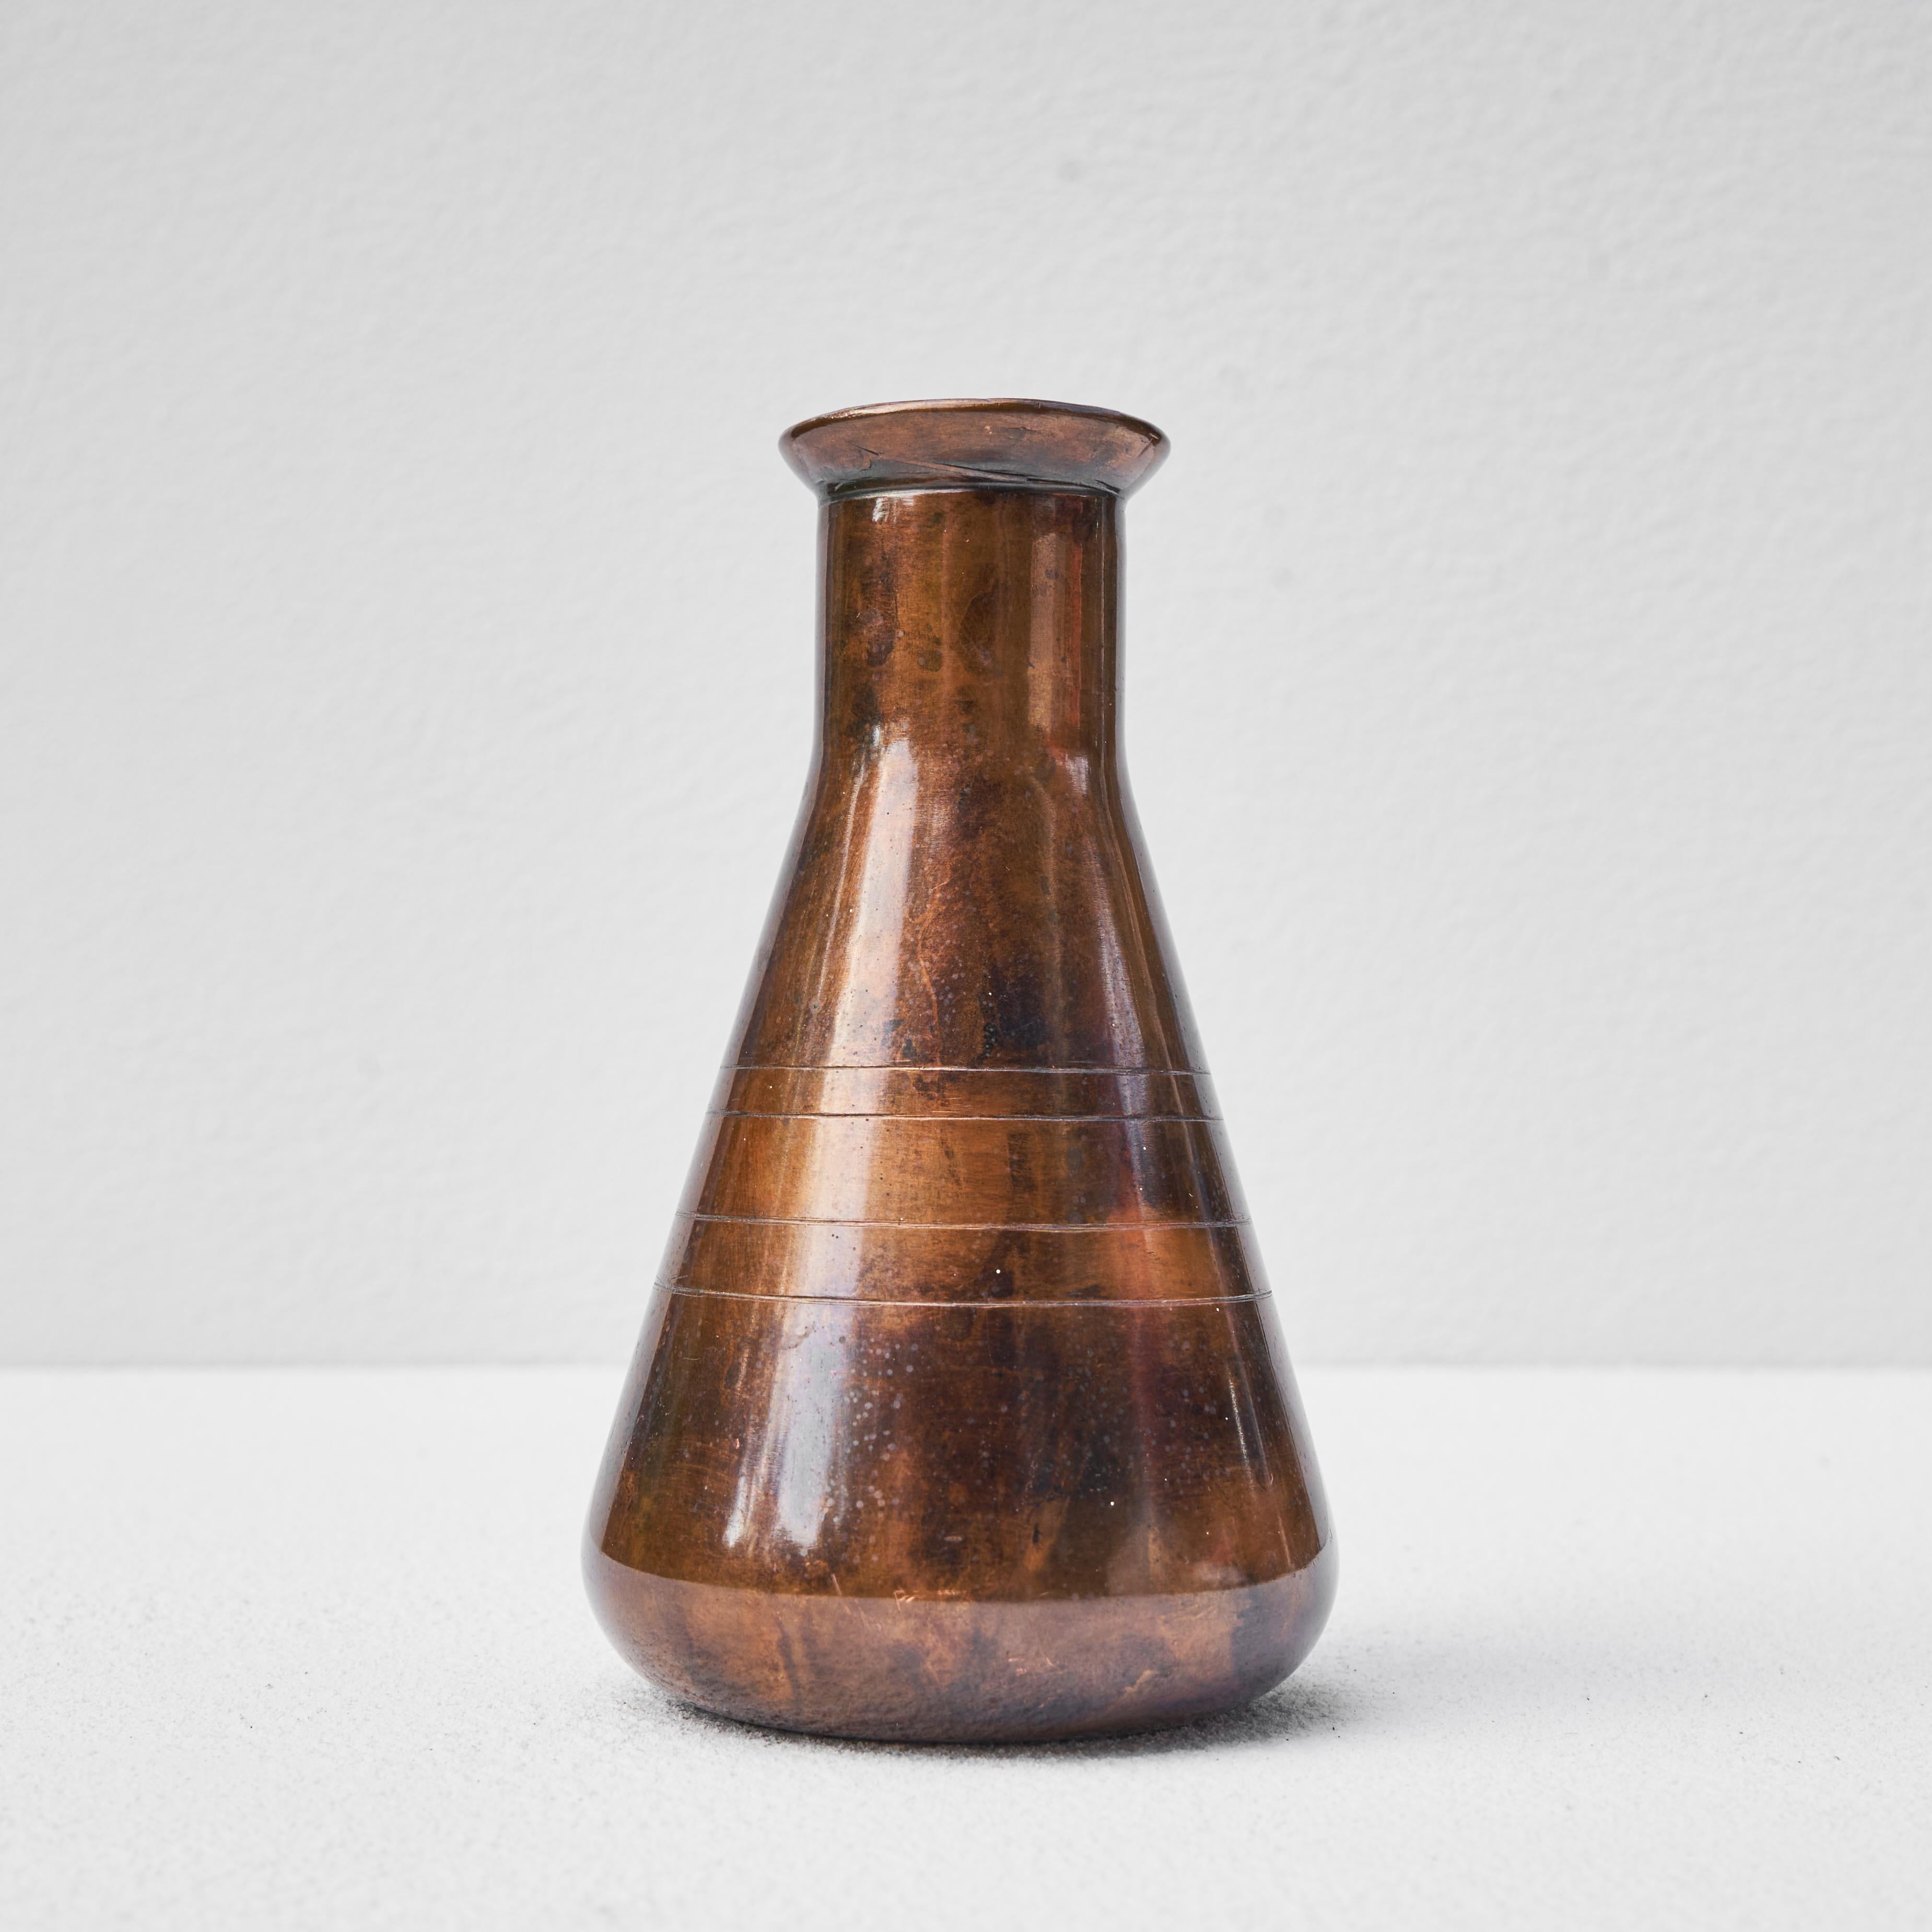 Conical Vase in Patinated Copper, 1950.

Wonderful vase in patinated copper, made by a craftsman in 1950. Dated on the underside. 

Great as a decorative item or as a vase - soliflore or with a small arrangement of flowers. Wonderful patination